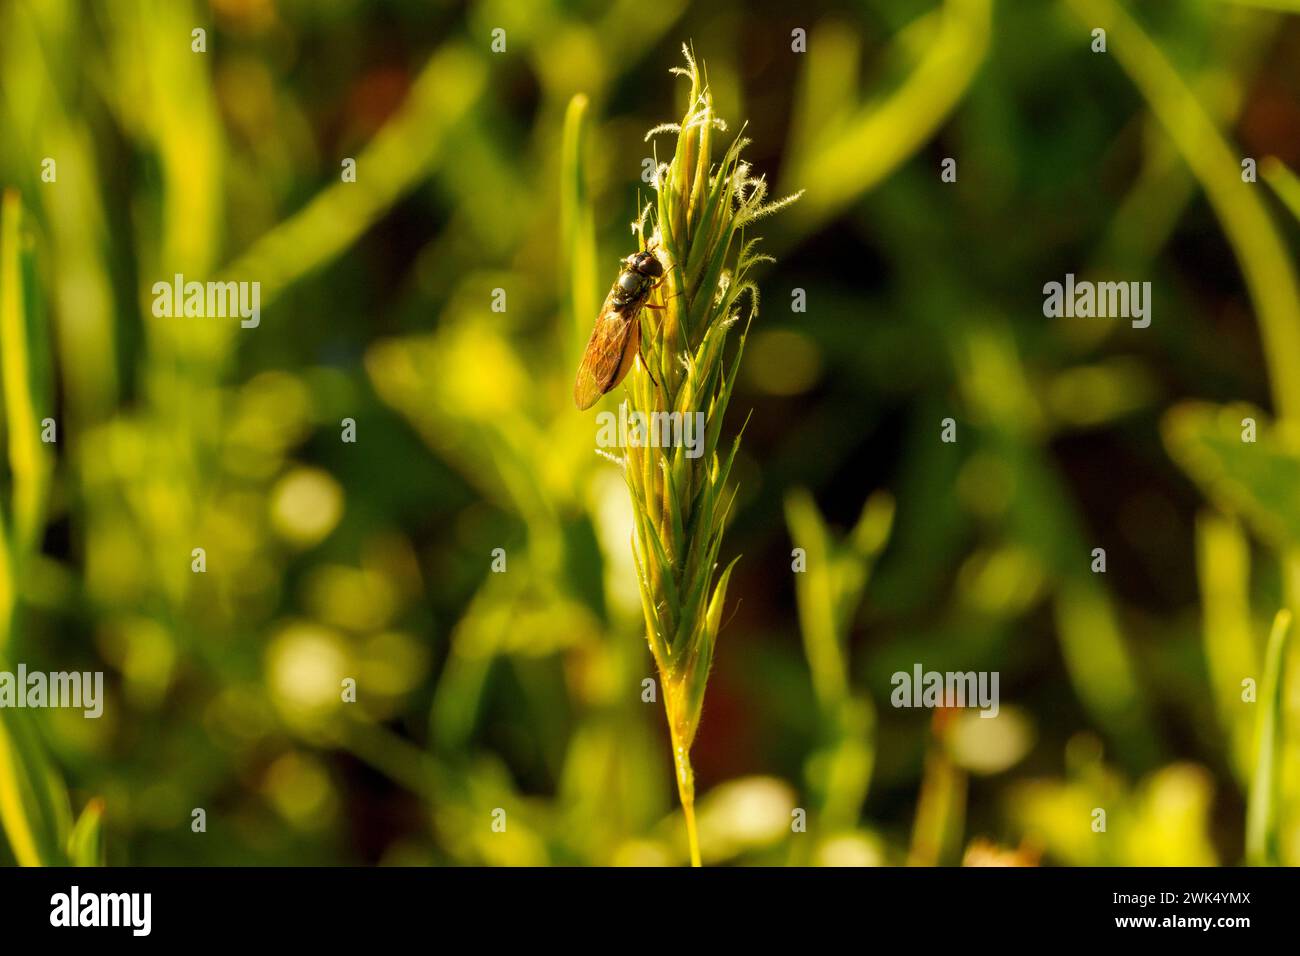 Platycheirus albimanus Genus Platycheirus Family Syrphidae fly wild nature insect wallpaper, picture, photography Stock Photo